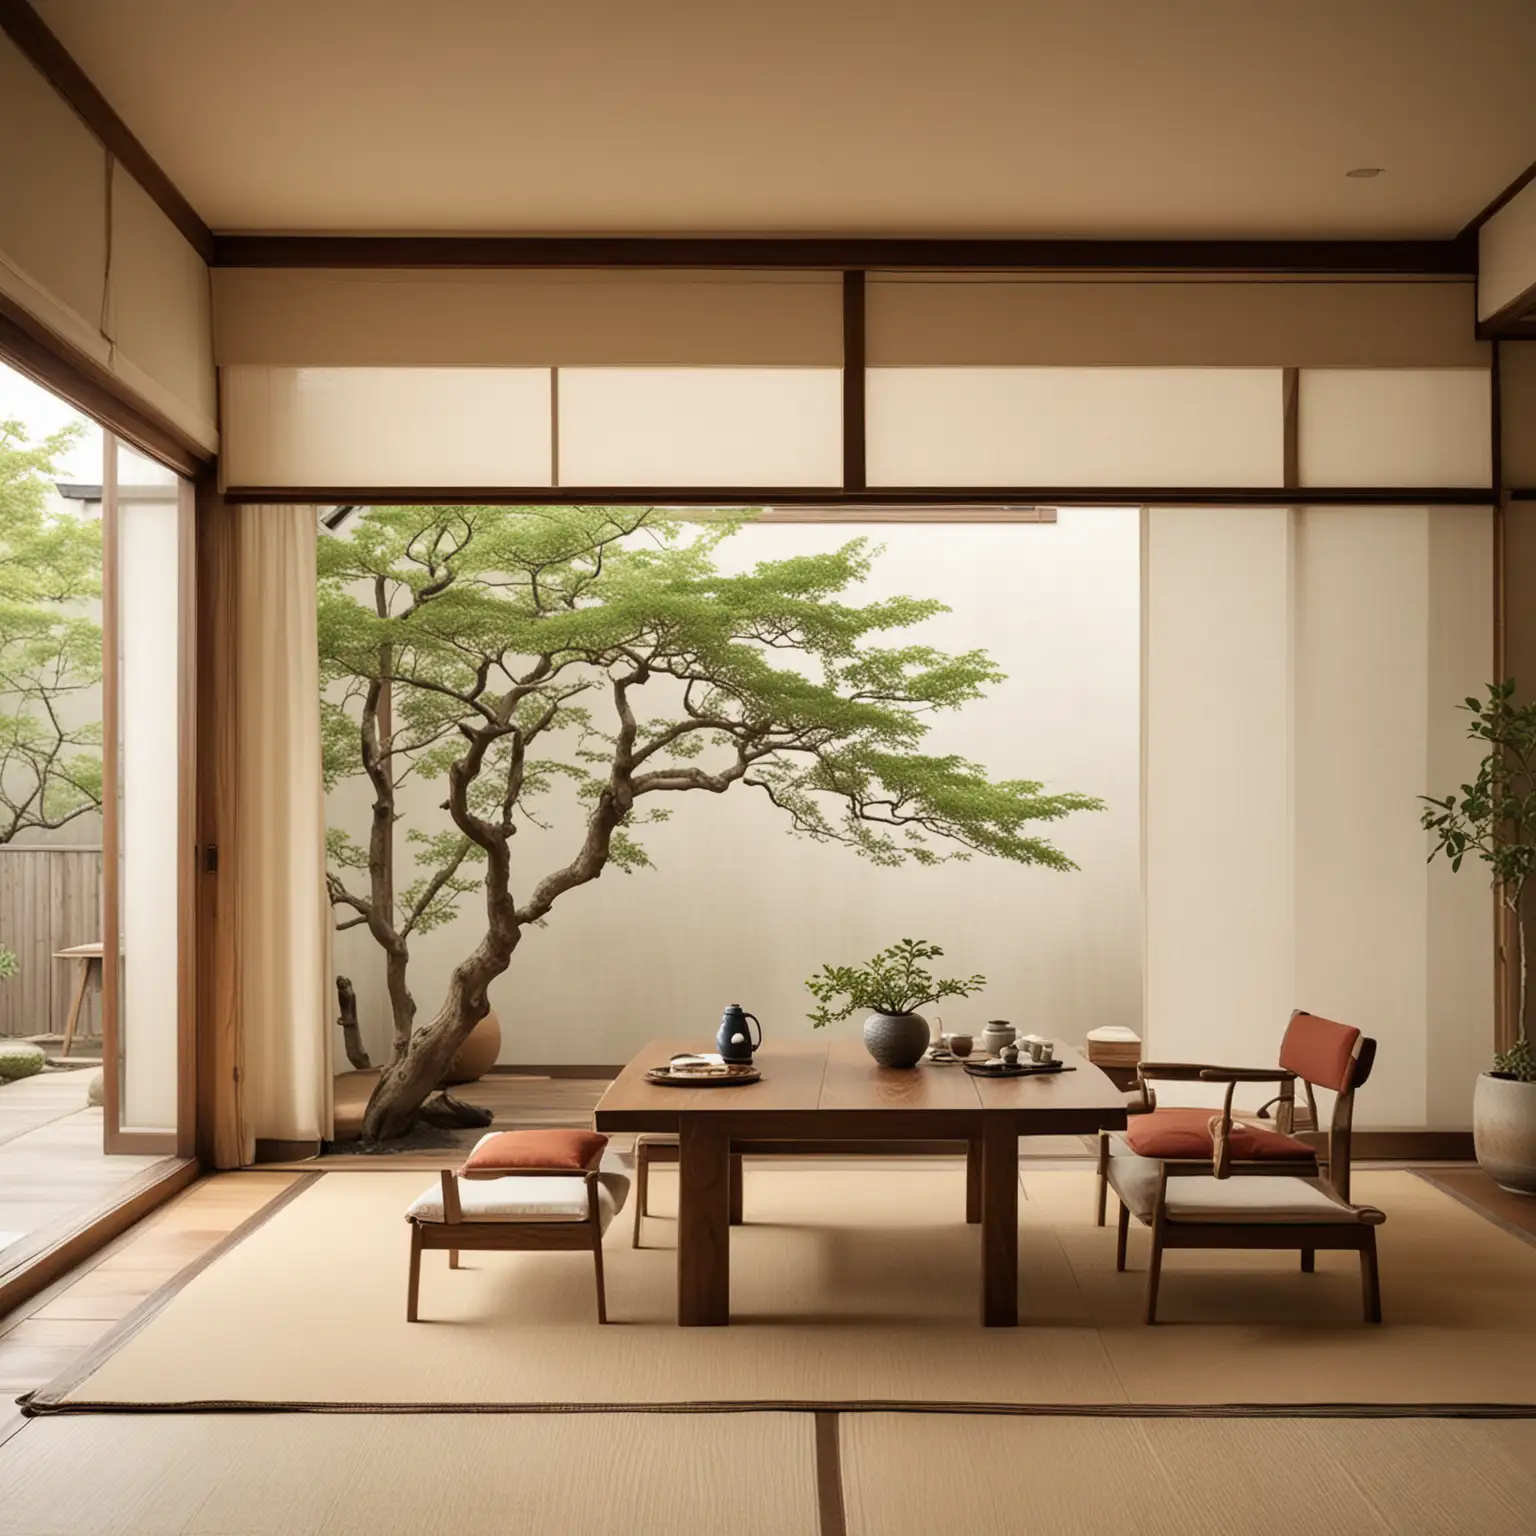 Minimalist-JapaneseInspired-Dining-Area-with-Low-Wooden-Table-and-Shoji-Screens